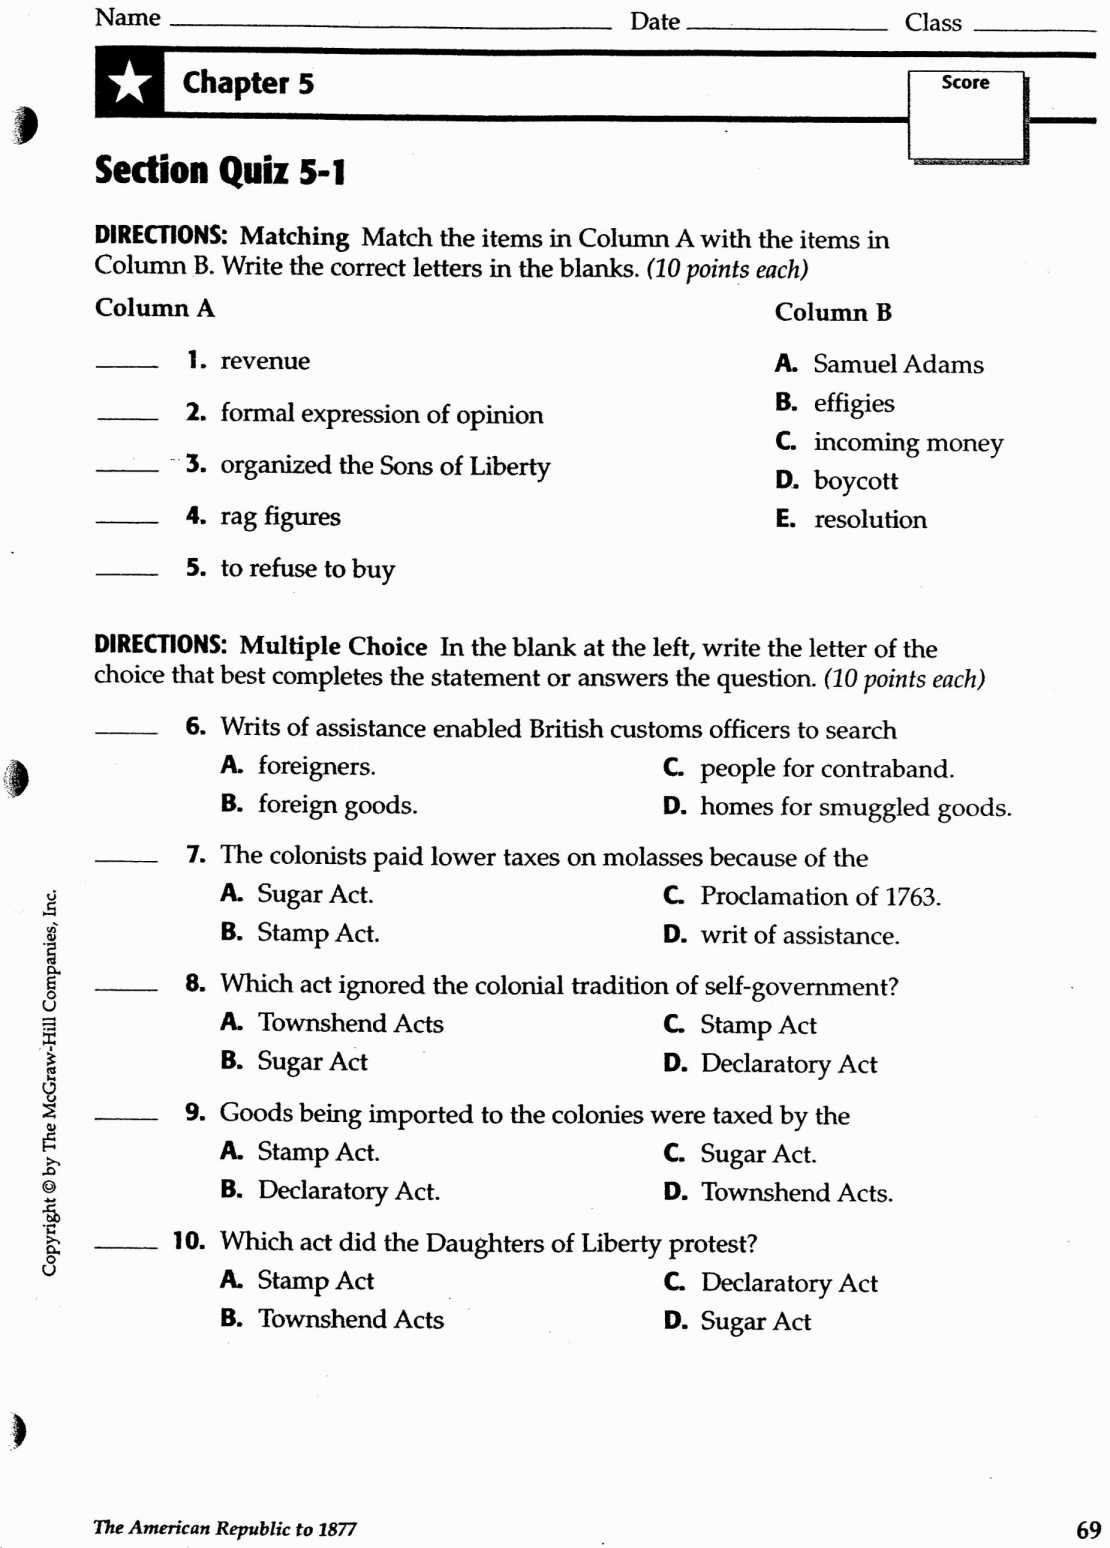 Constitutional Principles Worksheet Answers Scientific Method With Constitutional Principles Worksheet Answers